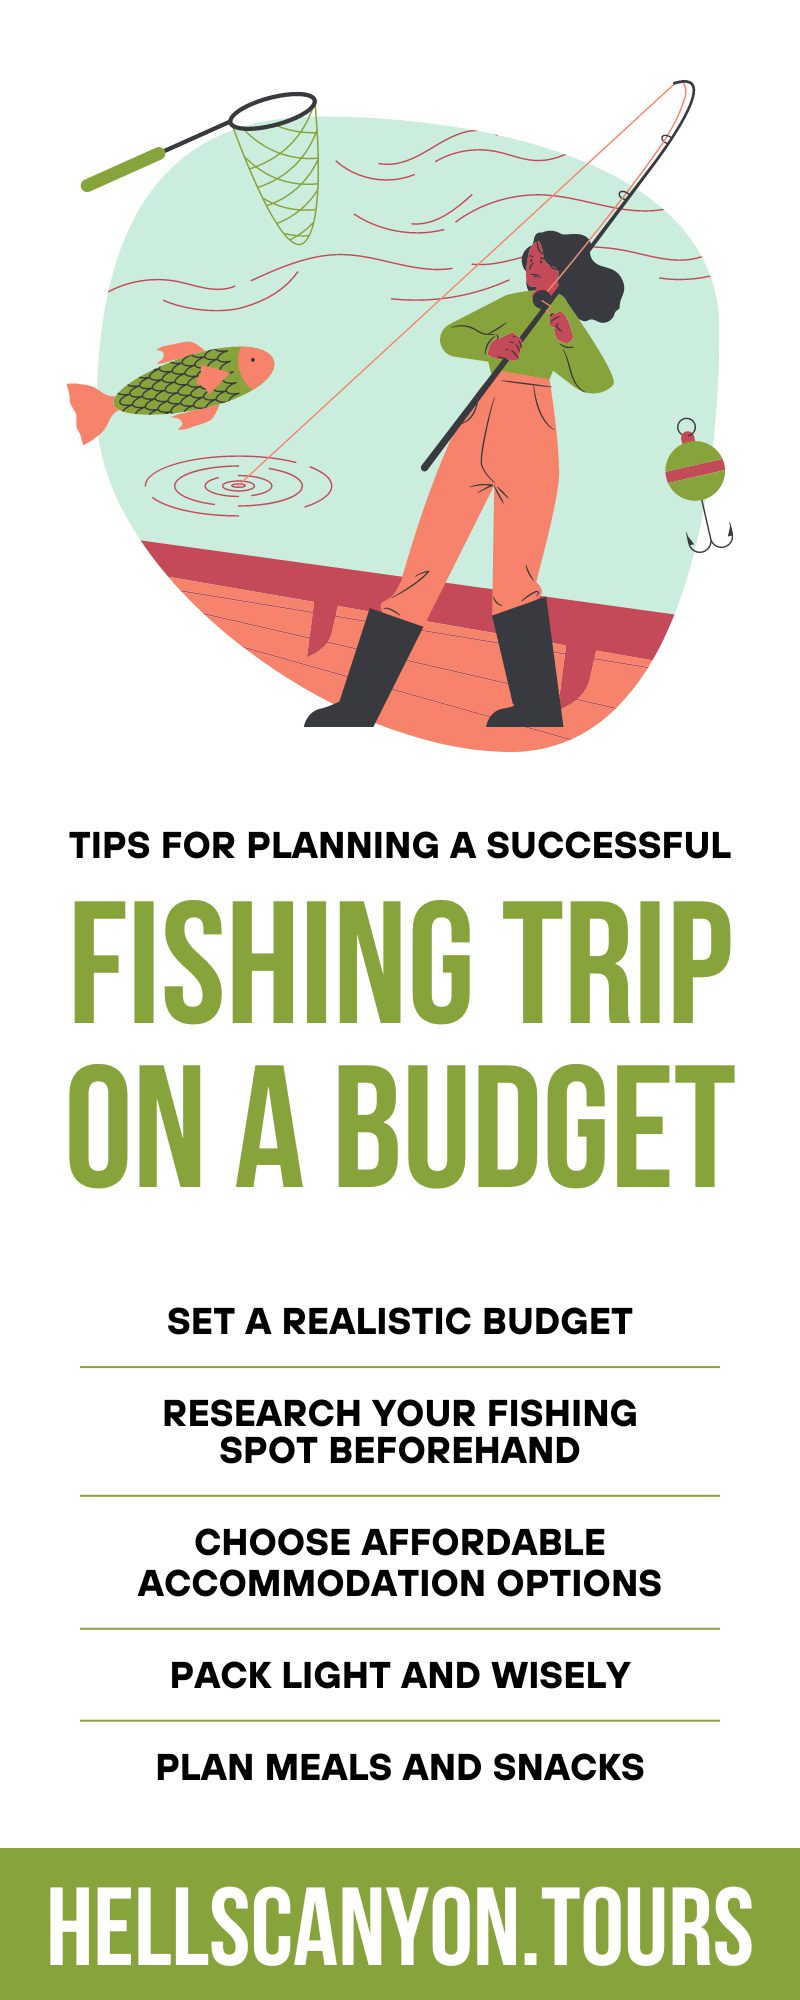 9 Tips for Planning a Successful Fishing Trip on a Budget